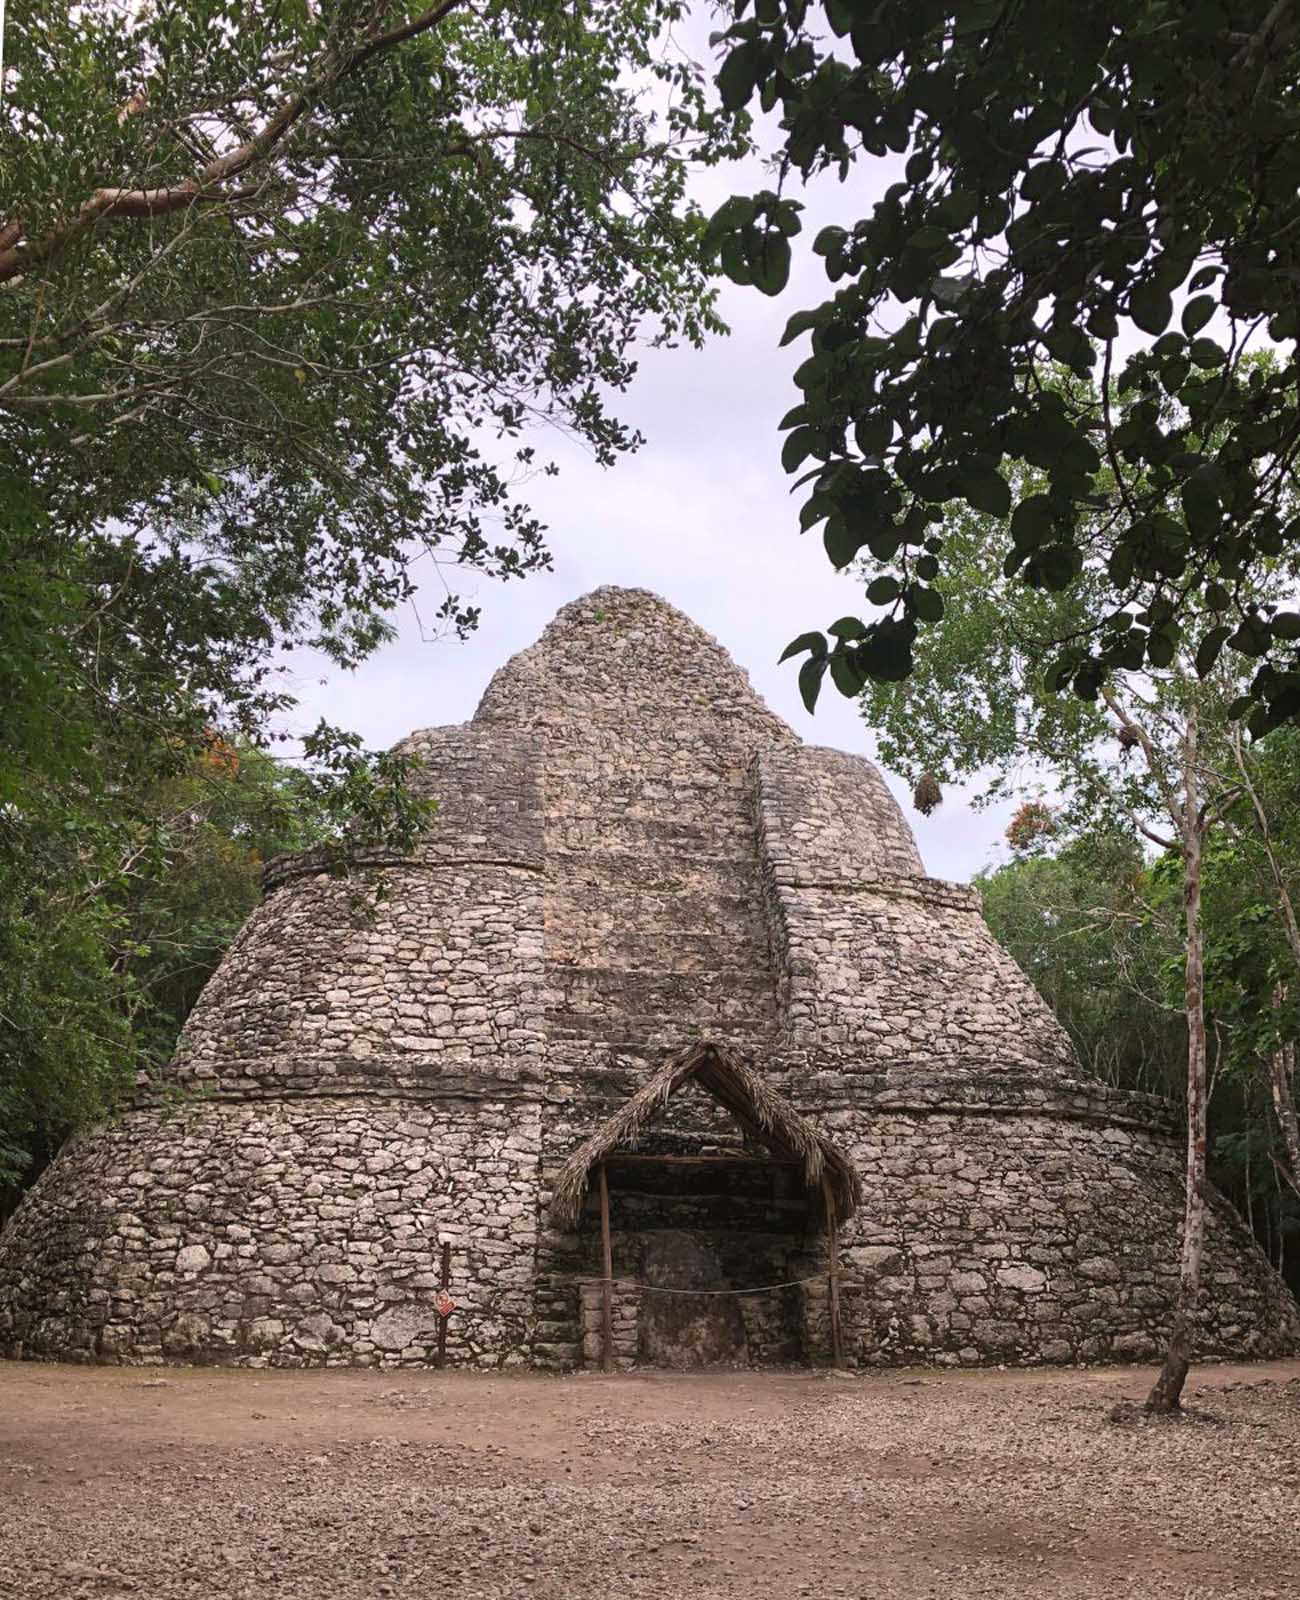 coba is not far from the mayan ruins of tulum